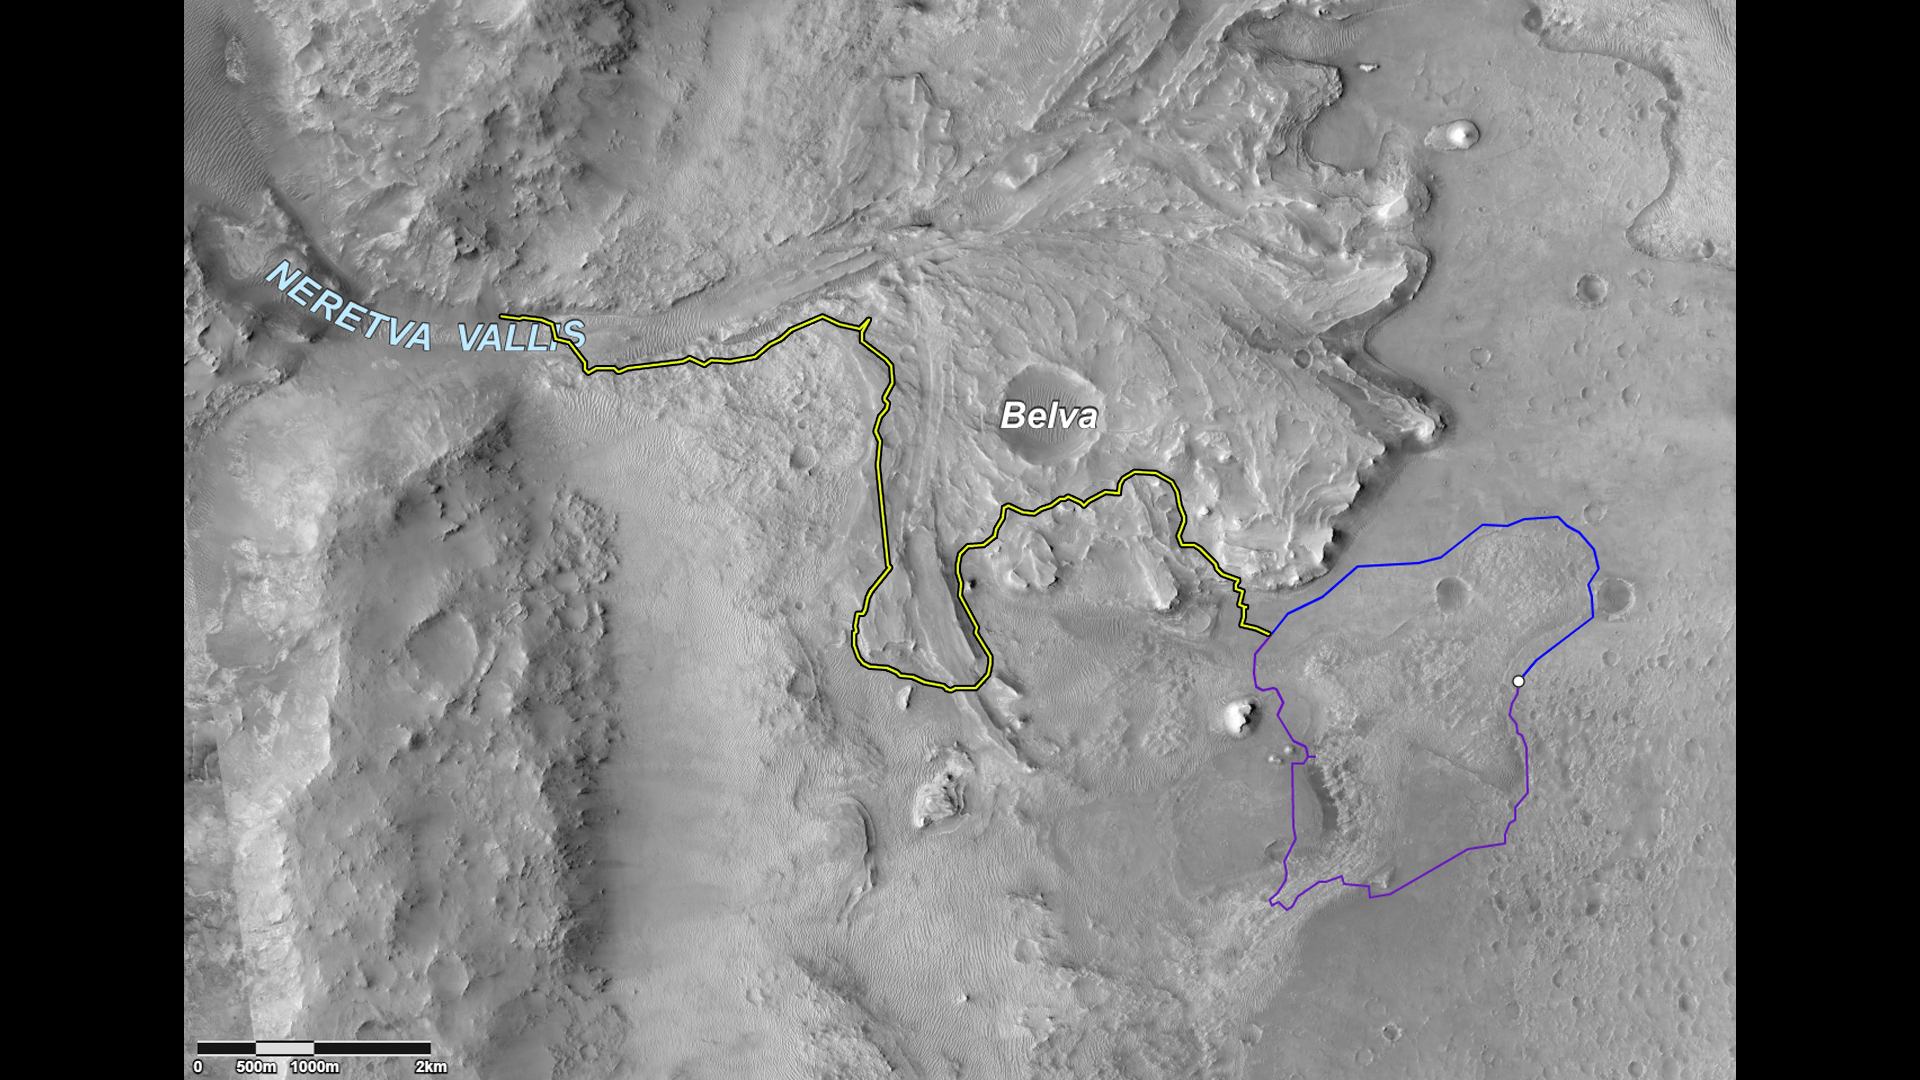 This image shows two possible routes (blue and purple) to the fan-shaped deposit of sediments known as a delta for NASA’s Perseverance rover on Mars. The yellow line marks a notional traverse exploring the Jezero delta.